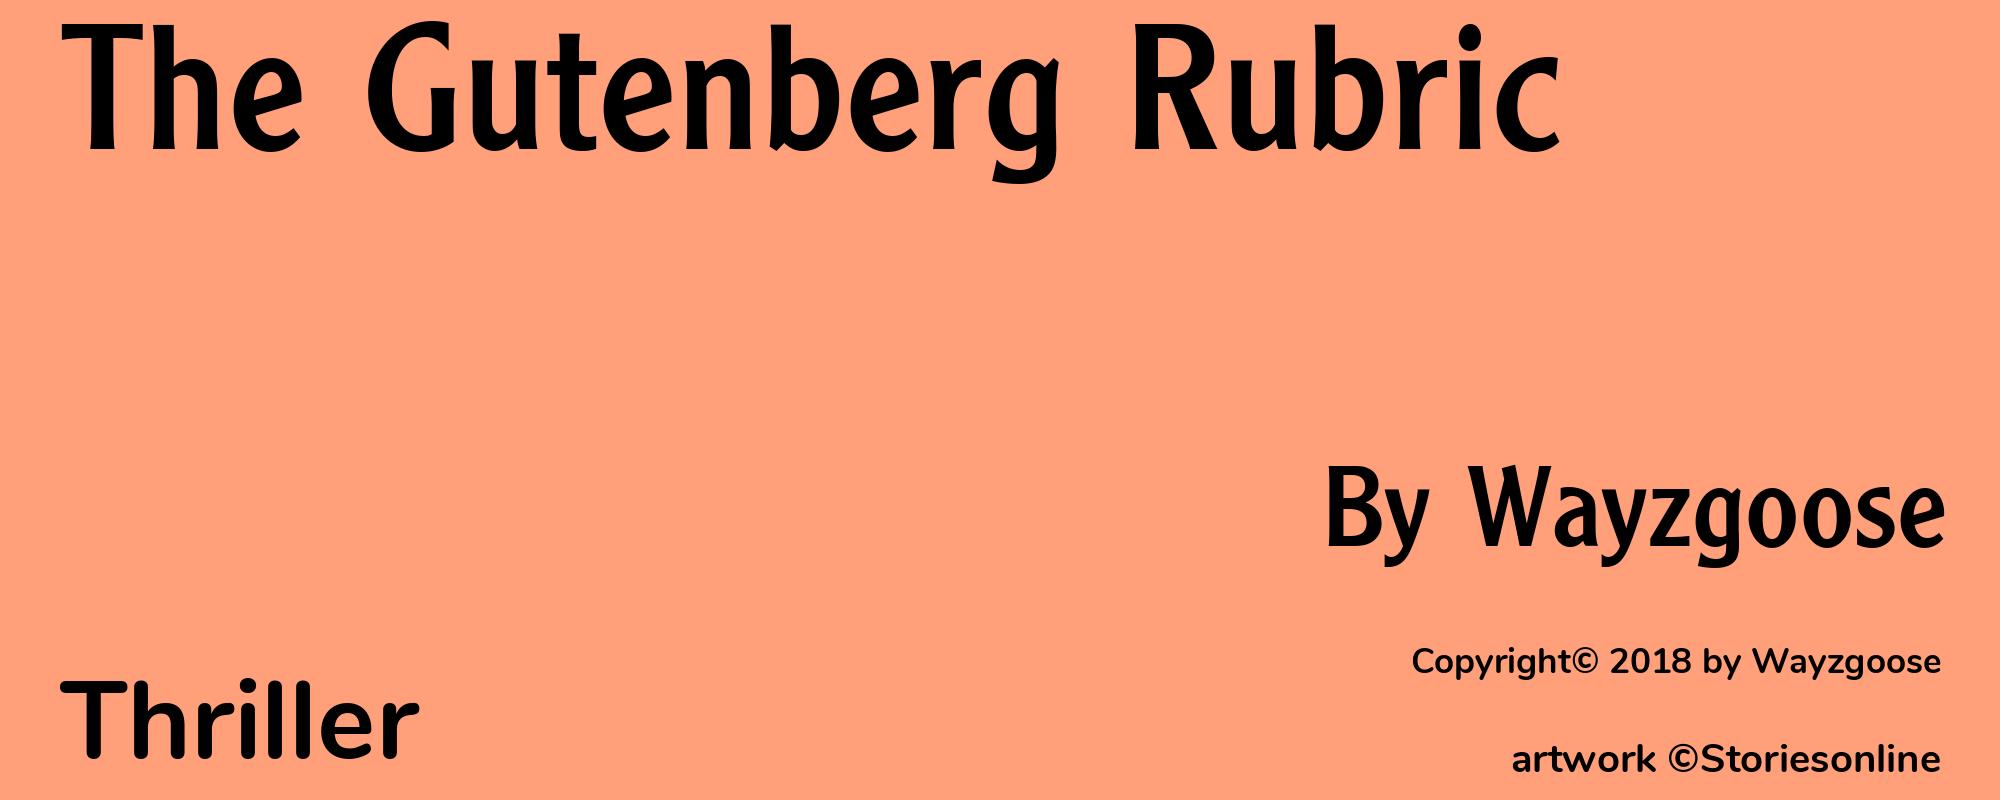 The Gutenberg Rubric - Cover